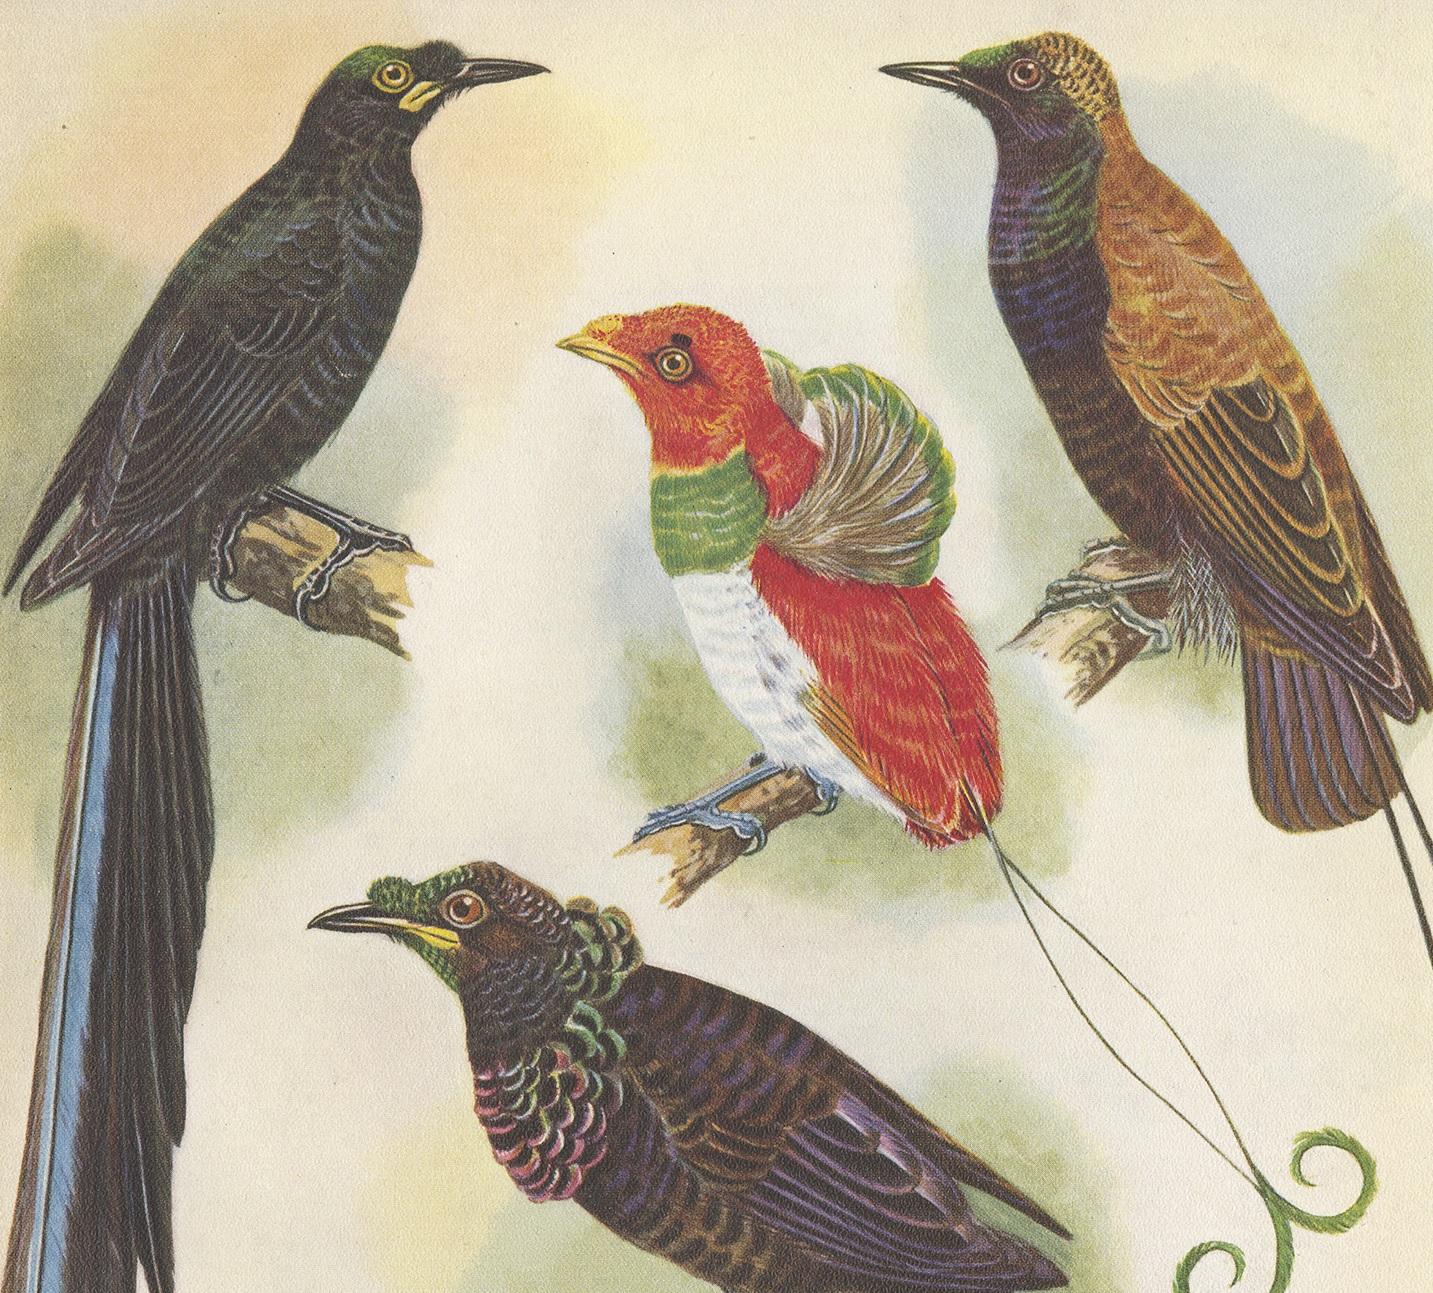 Decorative print illustrating the false-lobed Longtail, Ruys' Bird of Paradise, lonely little King, sharpe's lobe-bill and paradise crow. This authentic print originates from 'Birds of Paradise and Bower Birds' by Tom Iredale. With colored